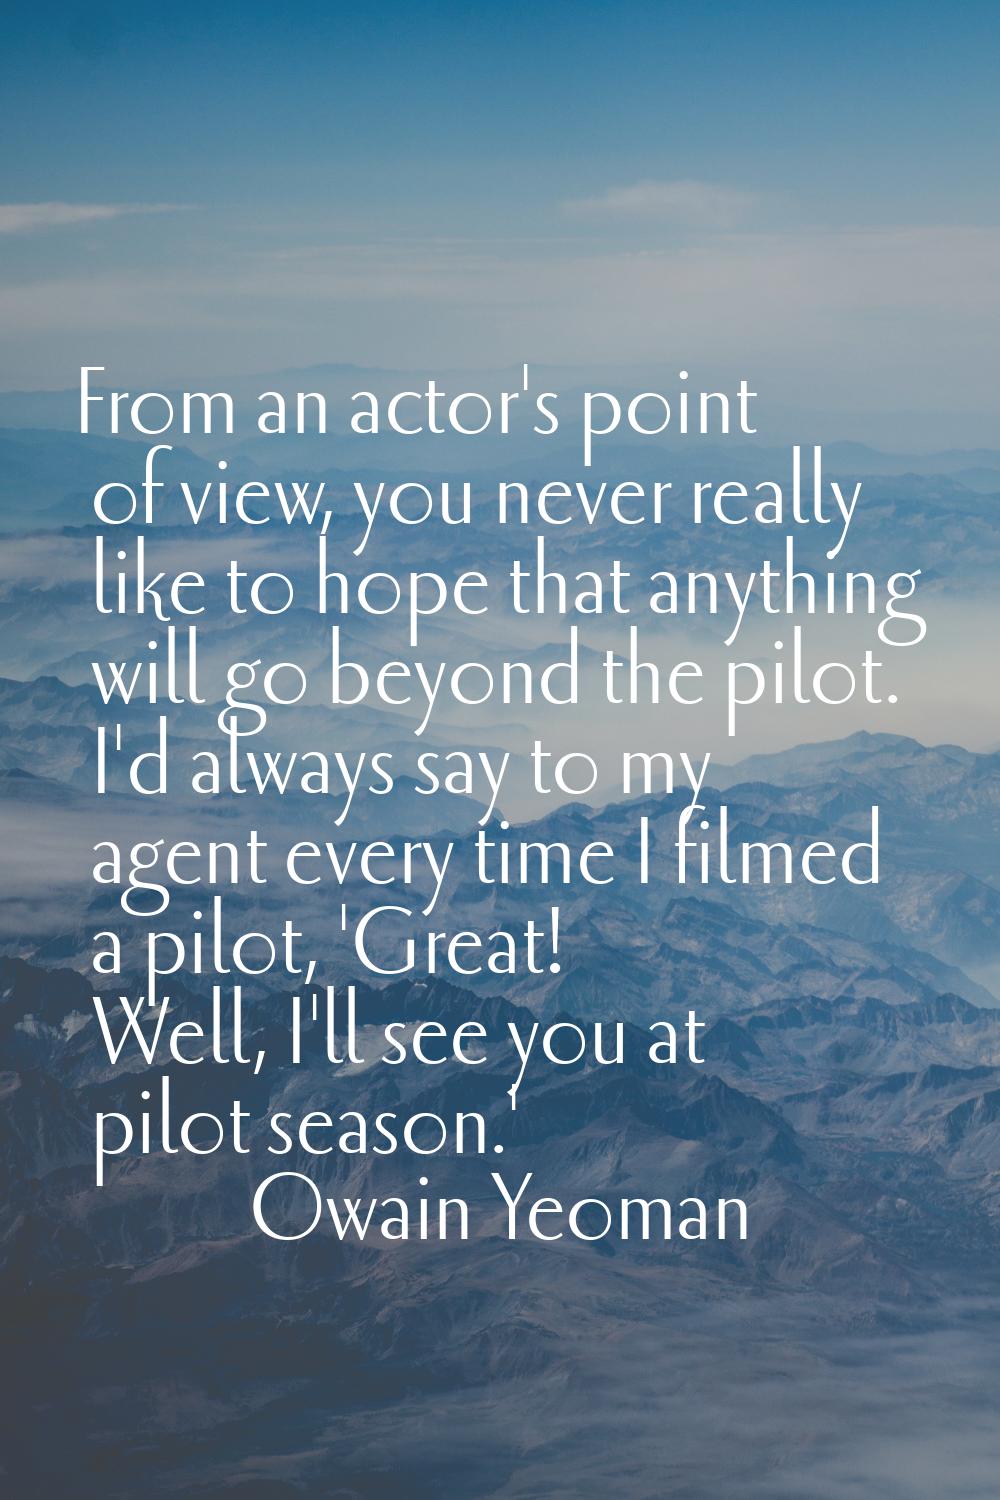 From an actor's point of view, you never really like to hope that anything will go beyond the pilot